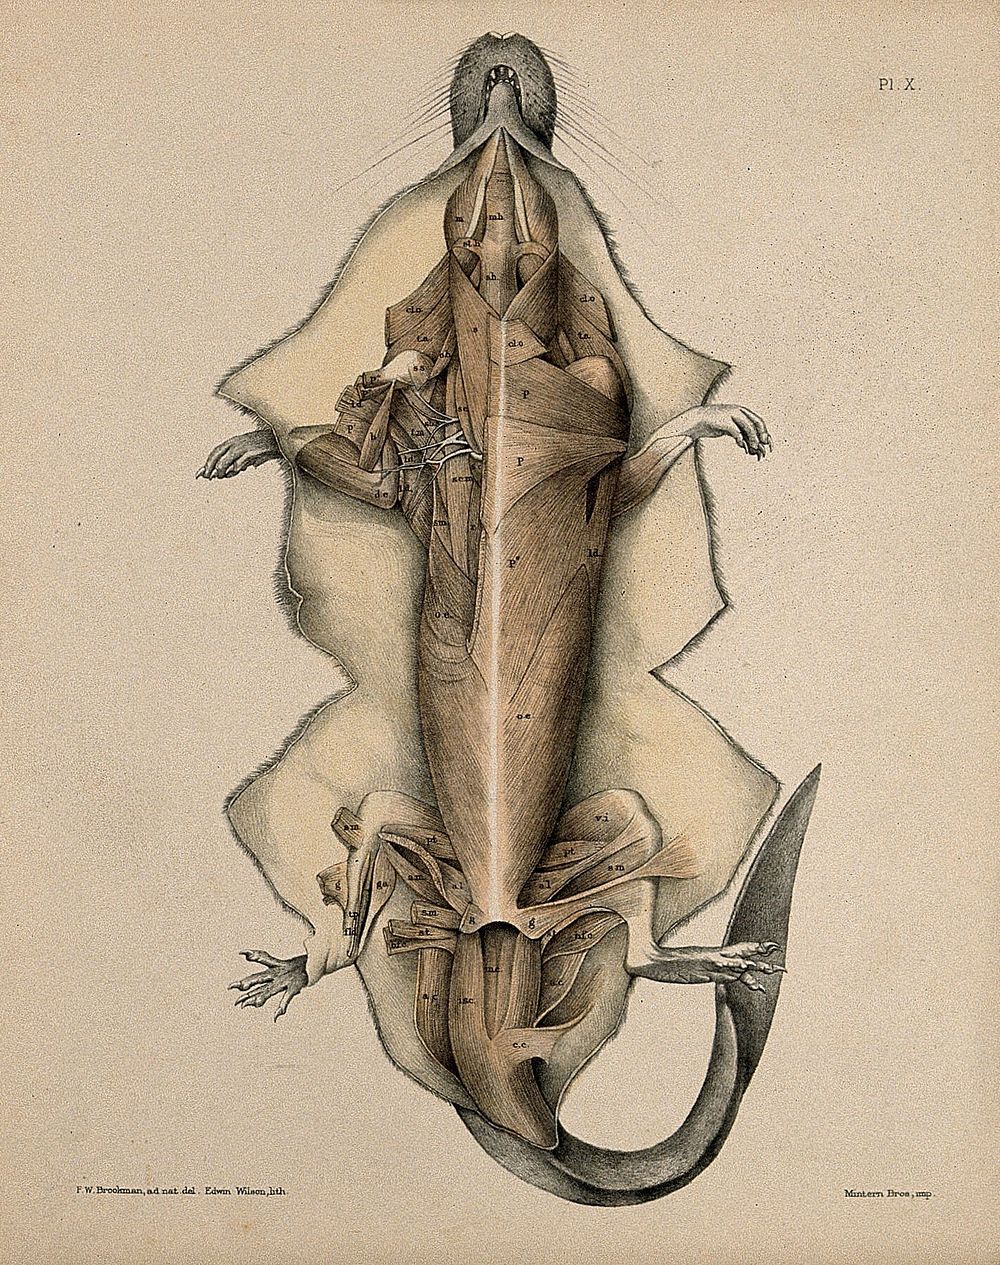 Dissection of a mole: view of the underside of the animal, showing the musculature. Lithograph by E. Wilson after F.W.…